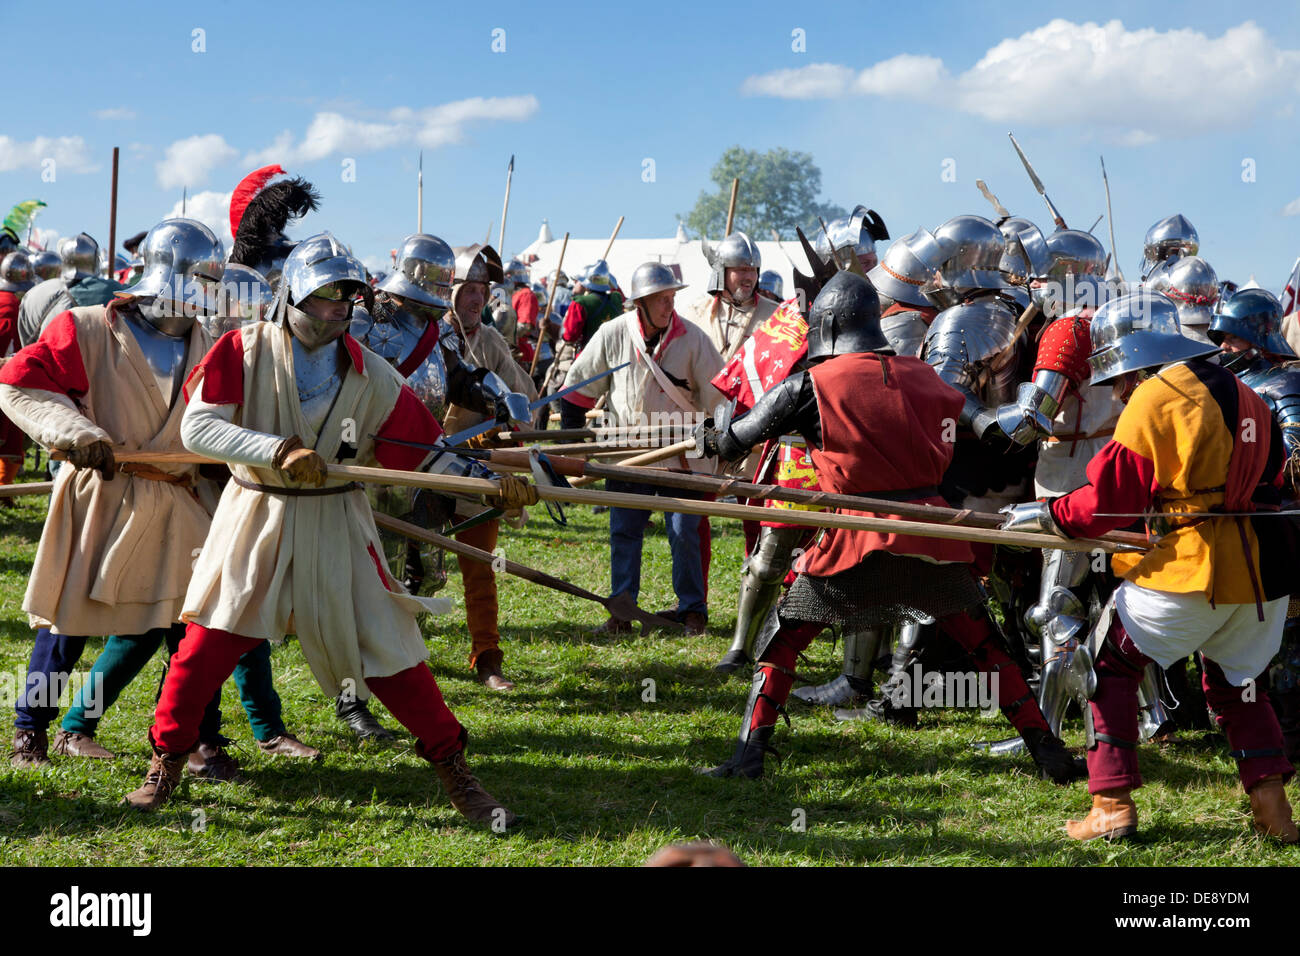 Wars of the Roses Federation re-enact the Battle of Bosworth near Hinckley Leicestershire England GB UK EU Europe Stock Photo